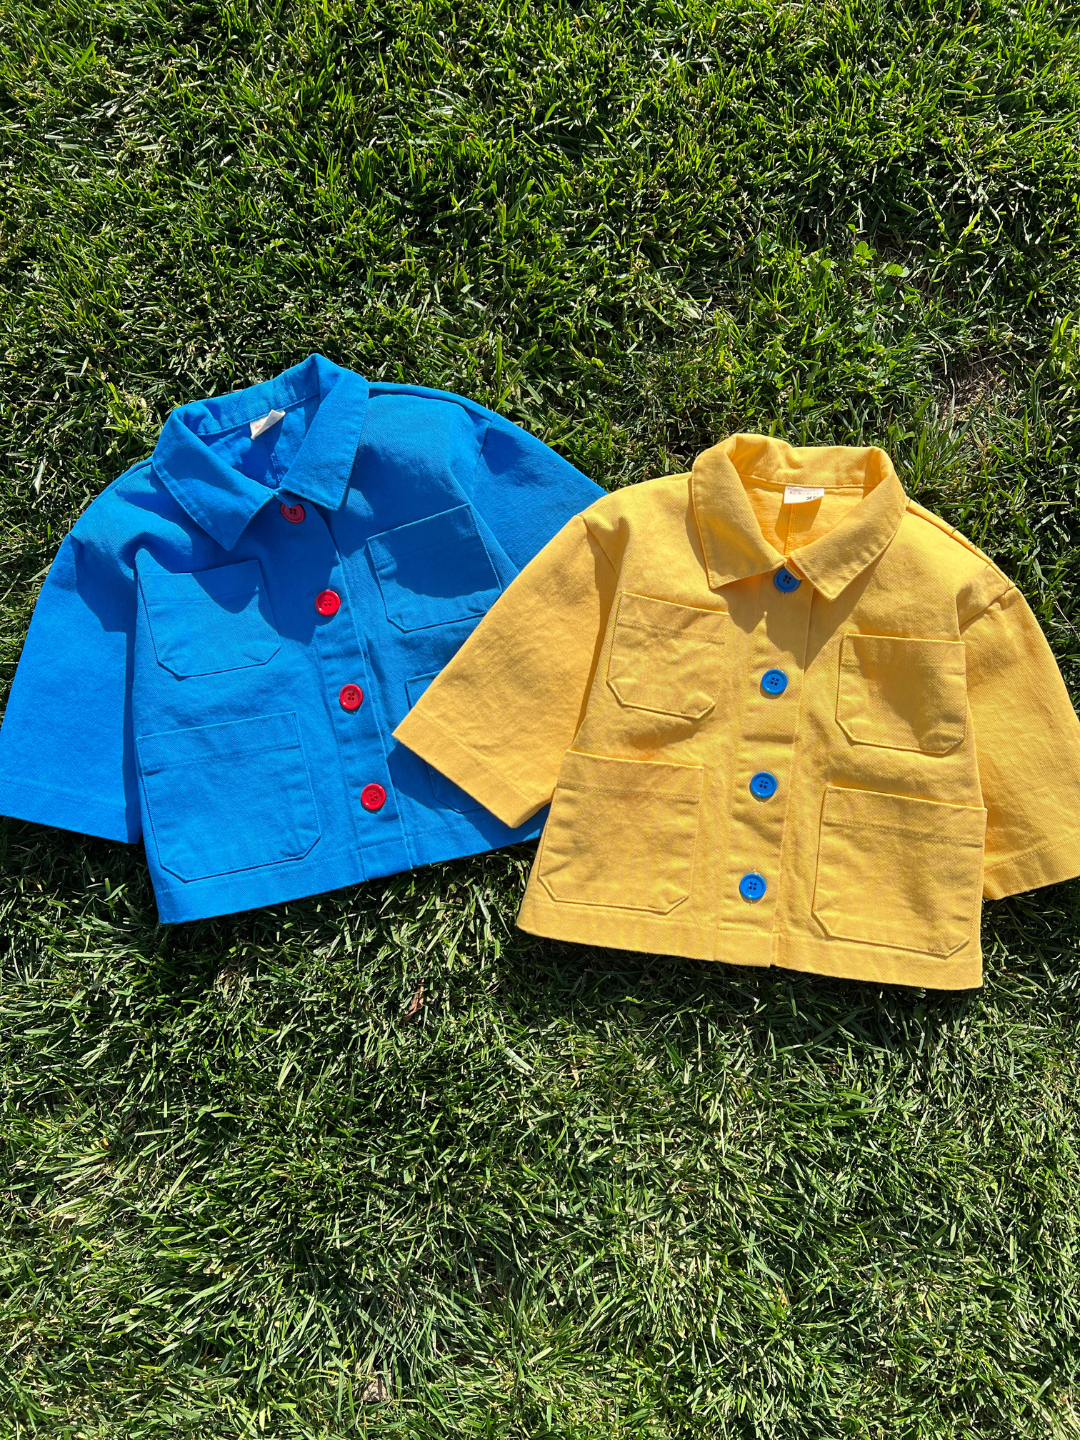 Yellow | Two kids' jackets laid on grass; one in sky blue with four pockets and four orange buttons, one in yellow with four pockets and four blue buttons